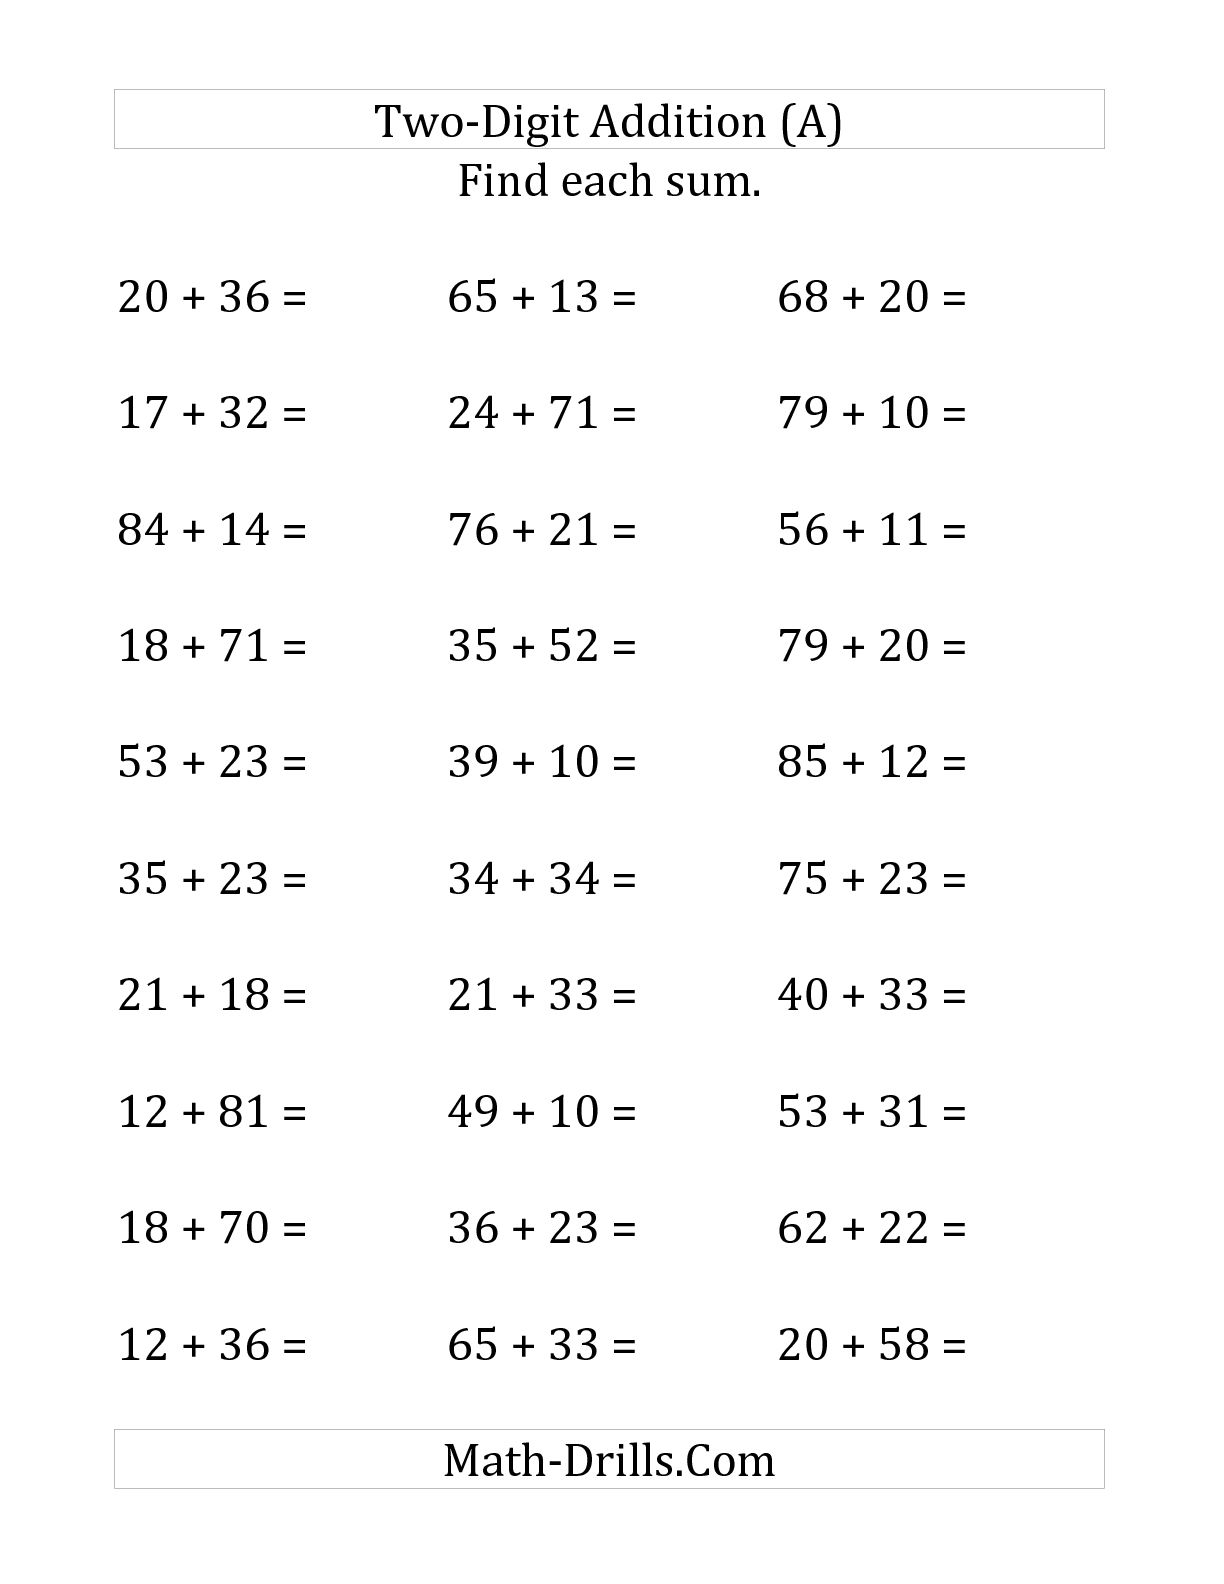 Double-Digit Addition No Regrouping Worksheet Image